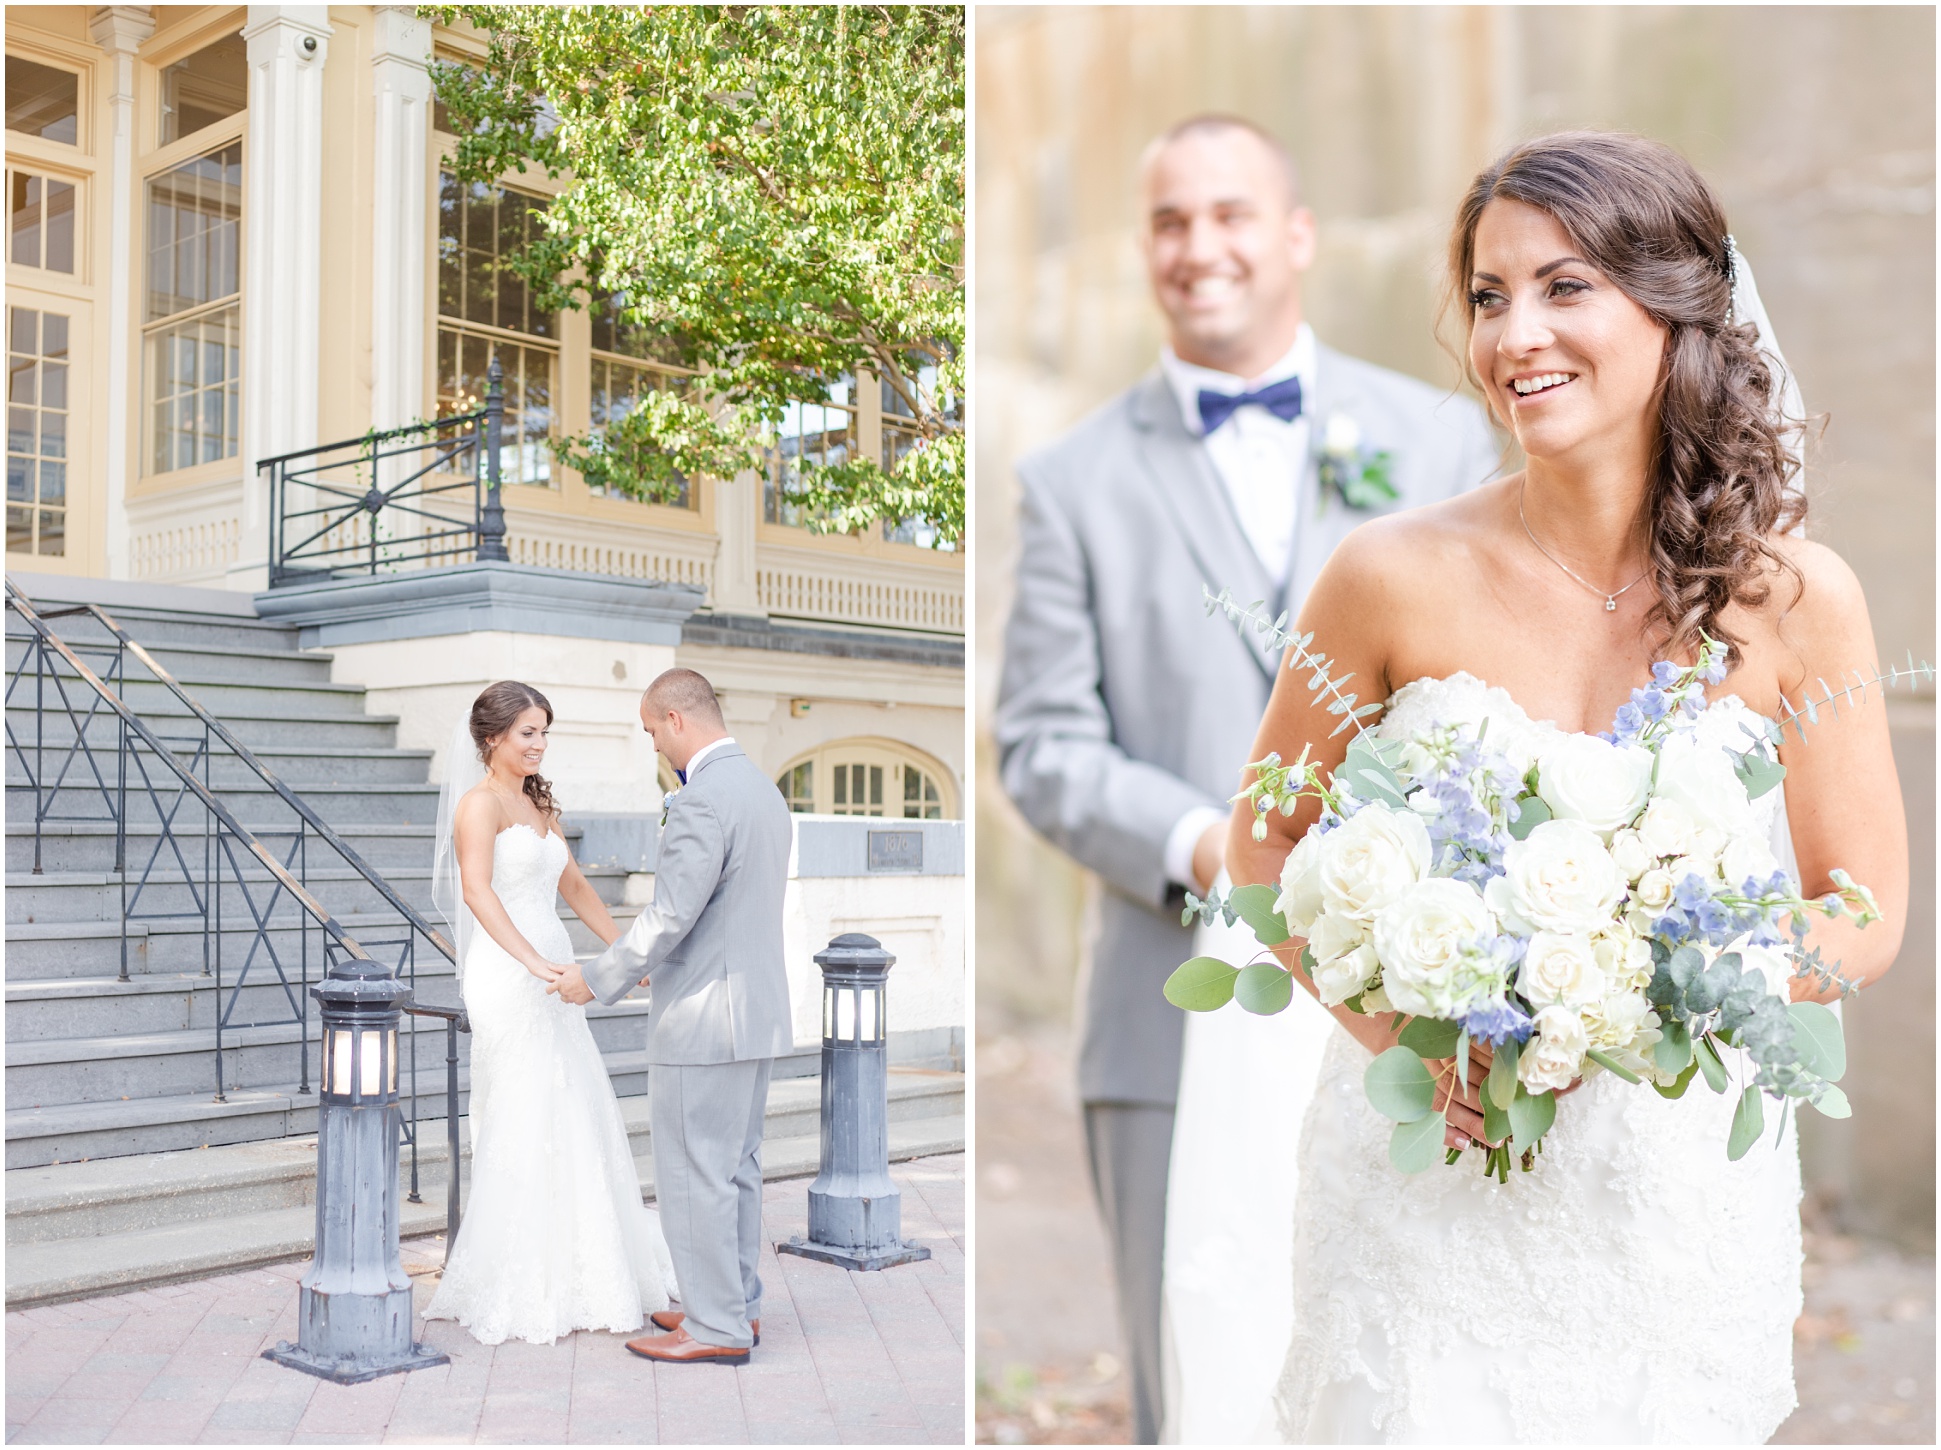 Left: Bride and groom looking at each other during first look, Right: Groom holding the train of the brides gown against a stone wall